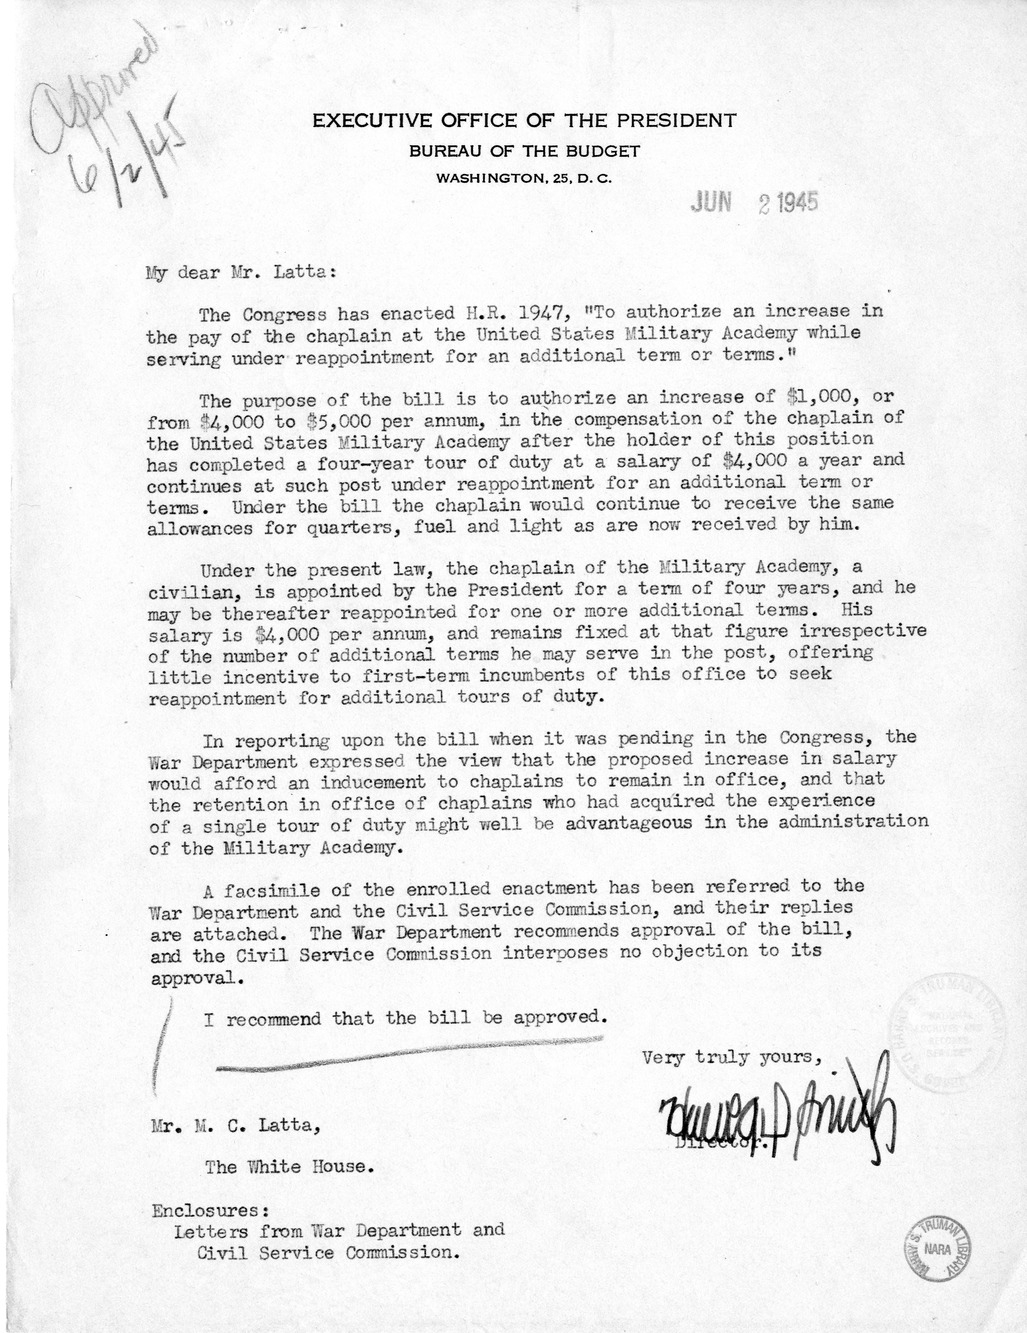 Memorandum from Harold D. Smith to M. C. Latta, H. R. 1947, to Authorize an Increase in the Pay of the Chaplain at the United States Military Academy While Serving Under Reappointment for an Additional Term or Terms, with Attachments